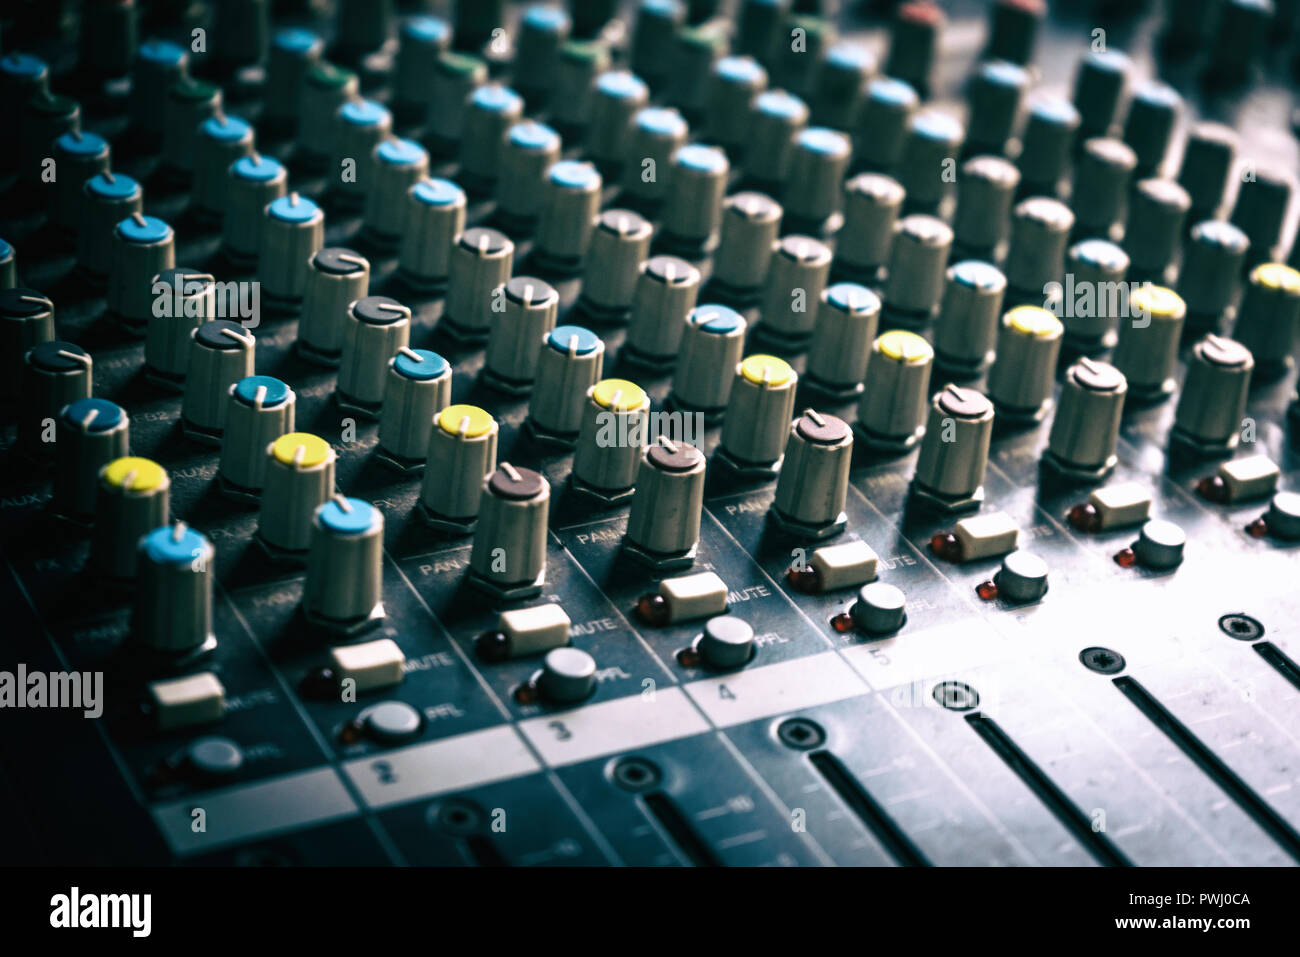 Close up of sound mixing board equipment. Stock Photo